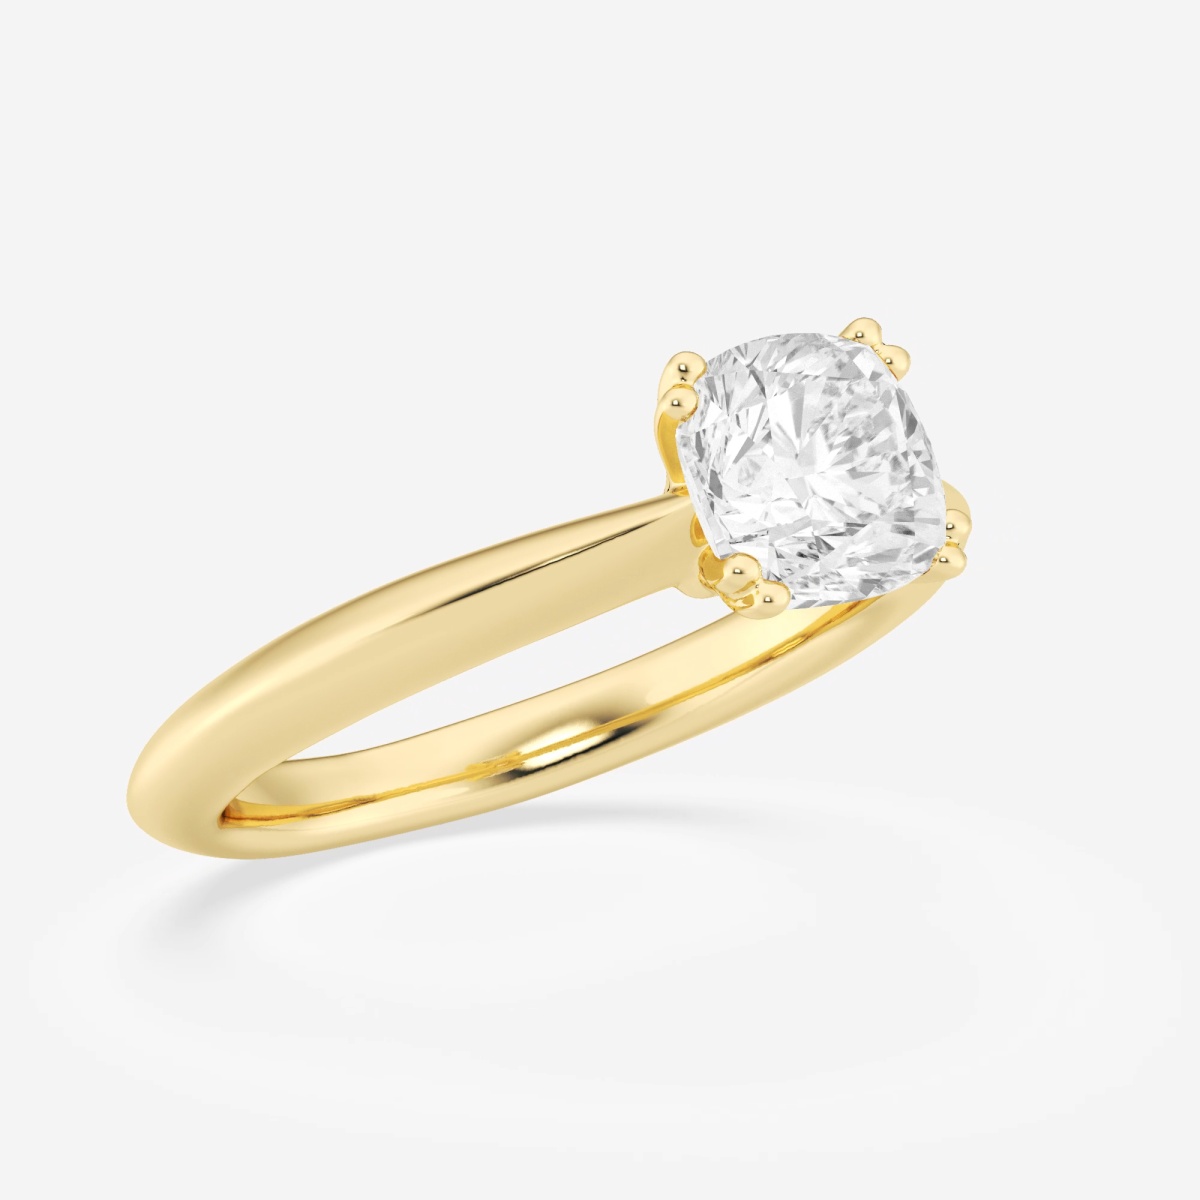 2.50 Ct Elongated Cushion Lab Diamond Engagement Ring, Fancy Solitaire  Ring, Yellow Gold Finished Ring, Claw 4-prong Wedding Proposal Ring 